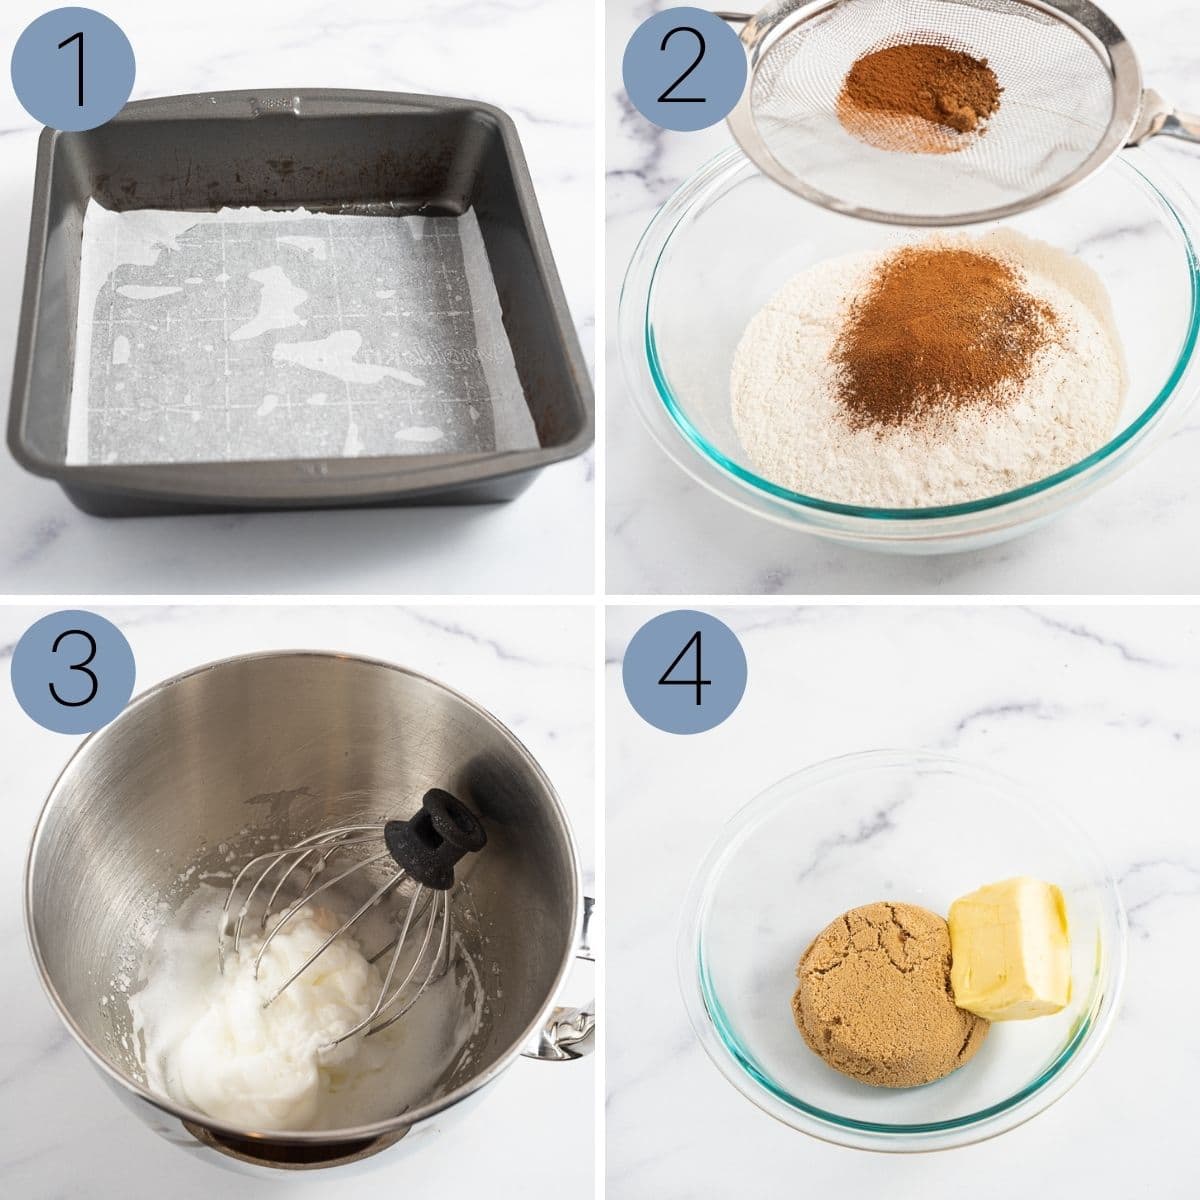 steps 1 to 4 of making the spice cake recipe